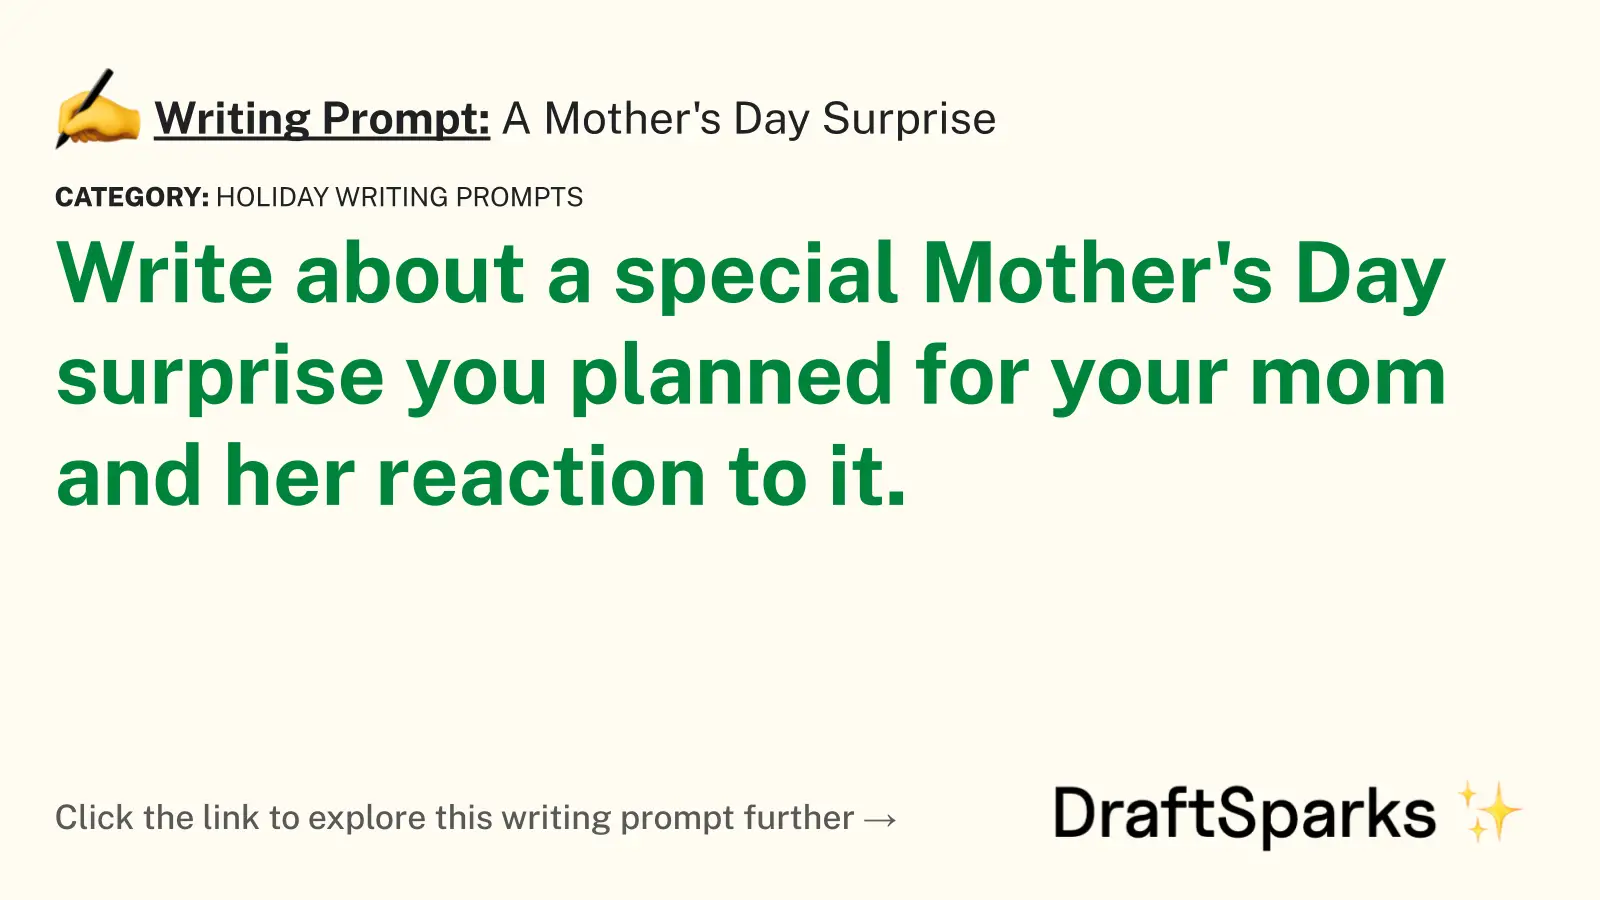 A Mother’s Day Surprise